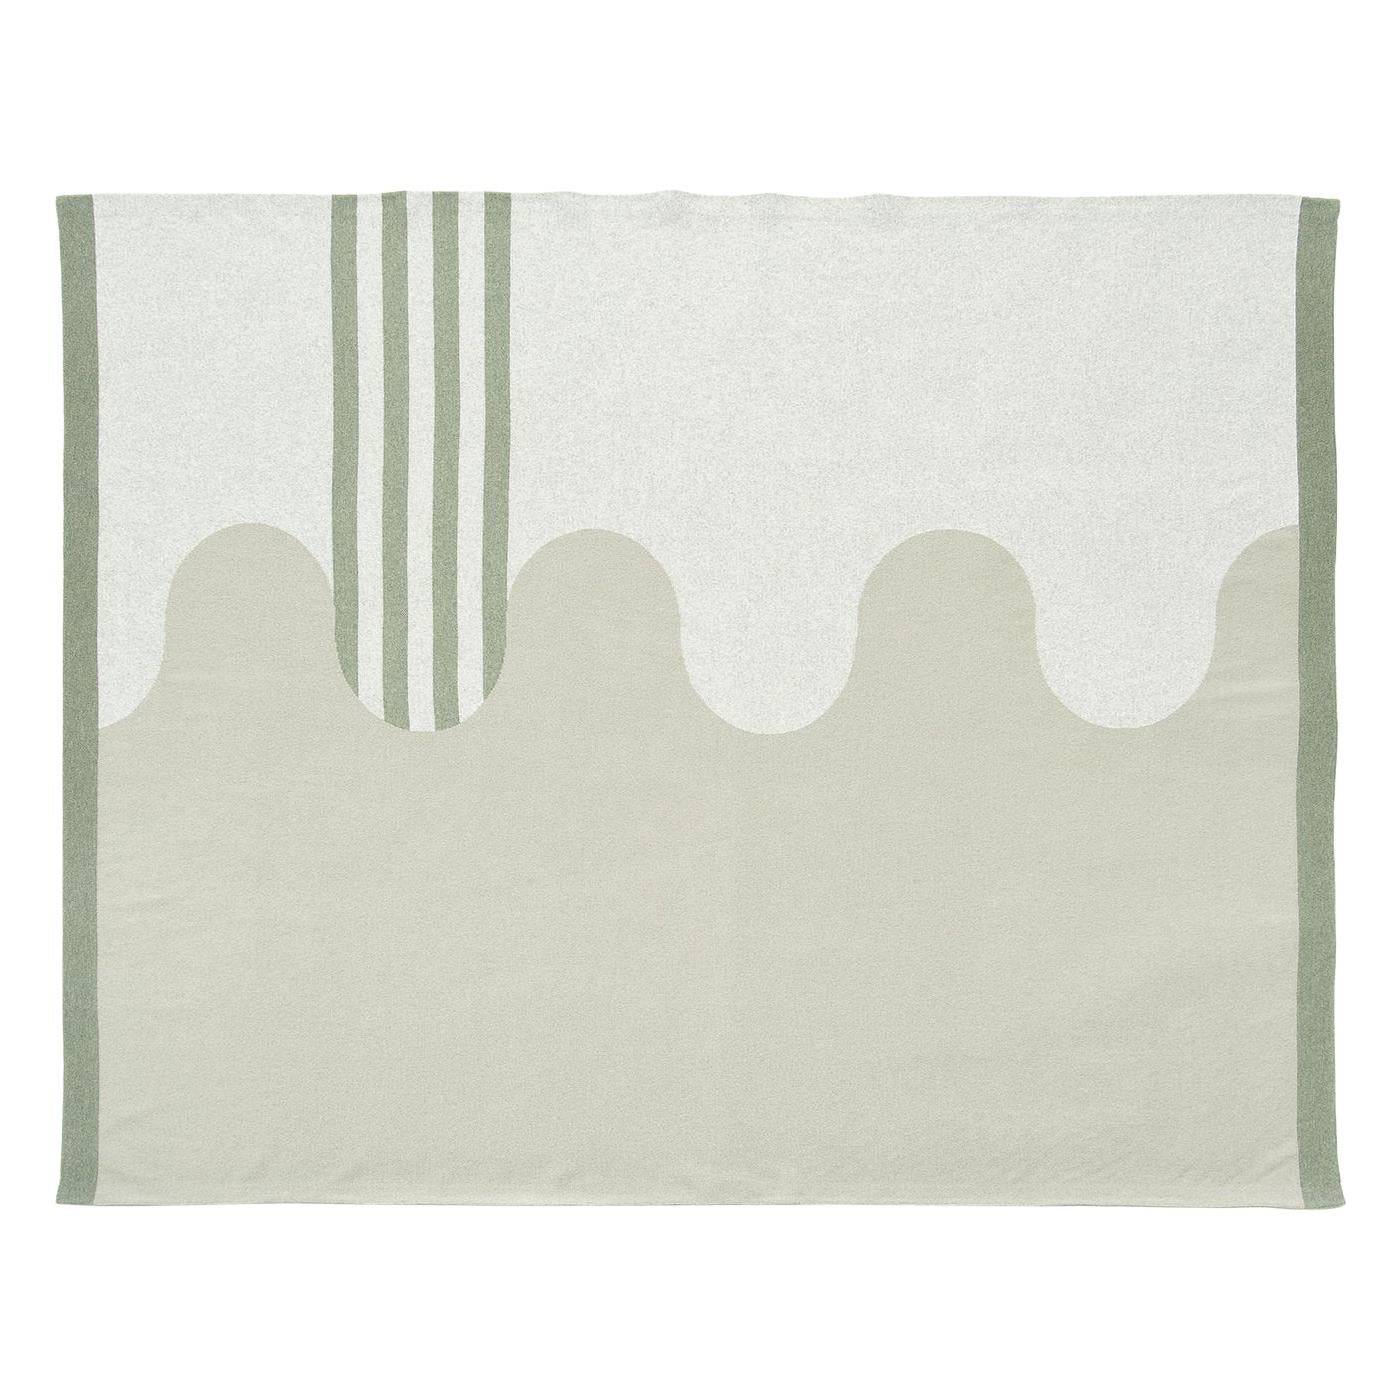 Sinuous Line Gray Blanket